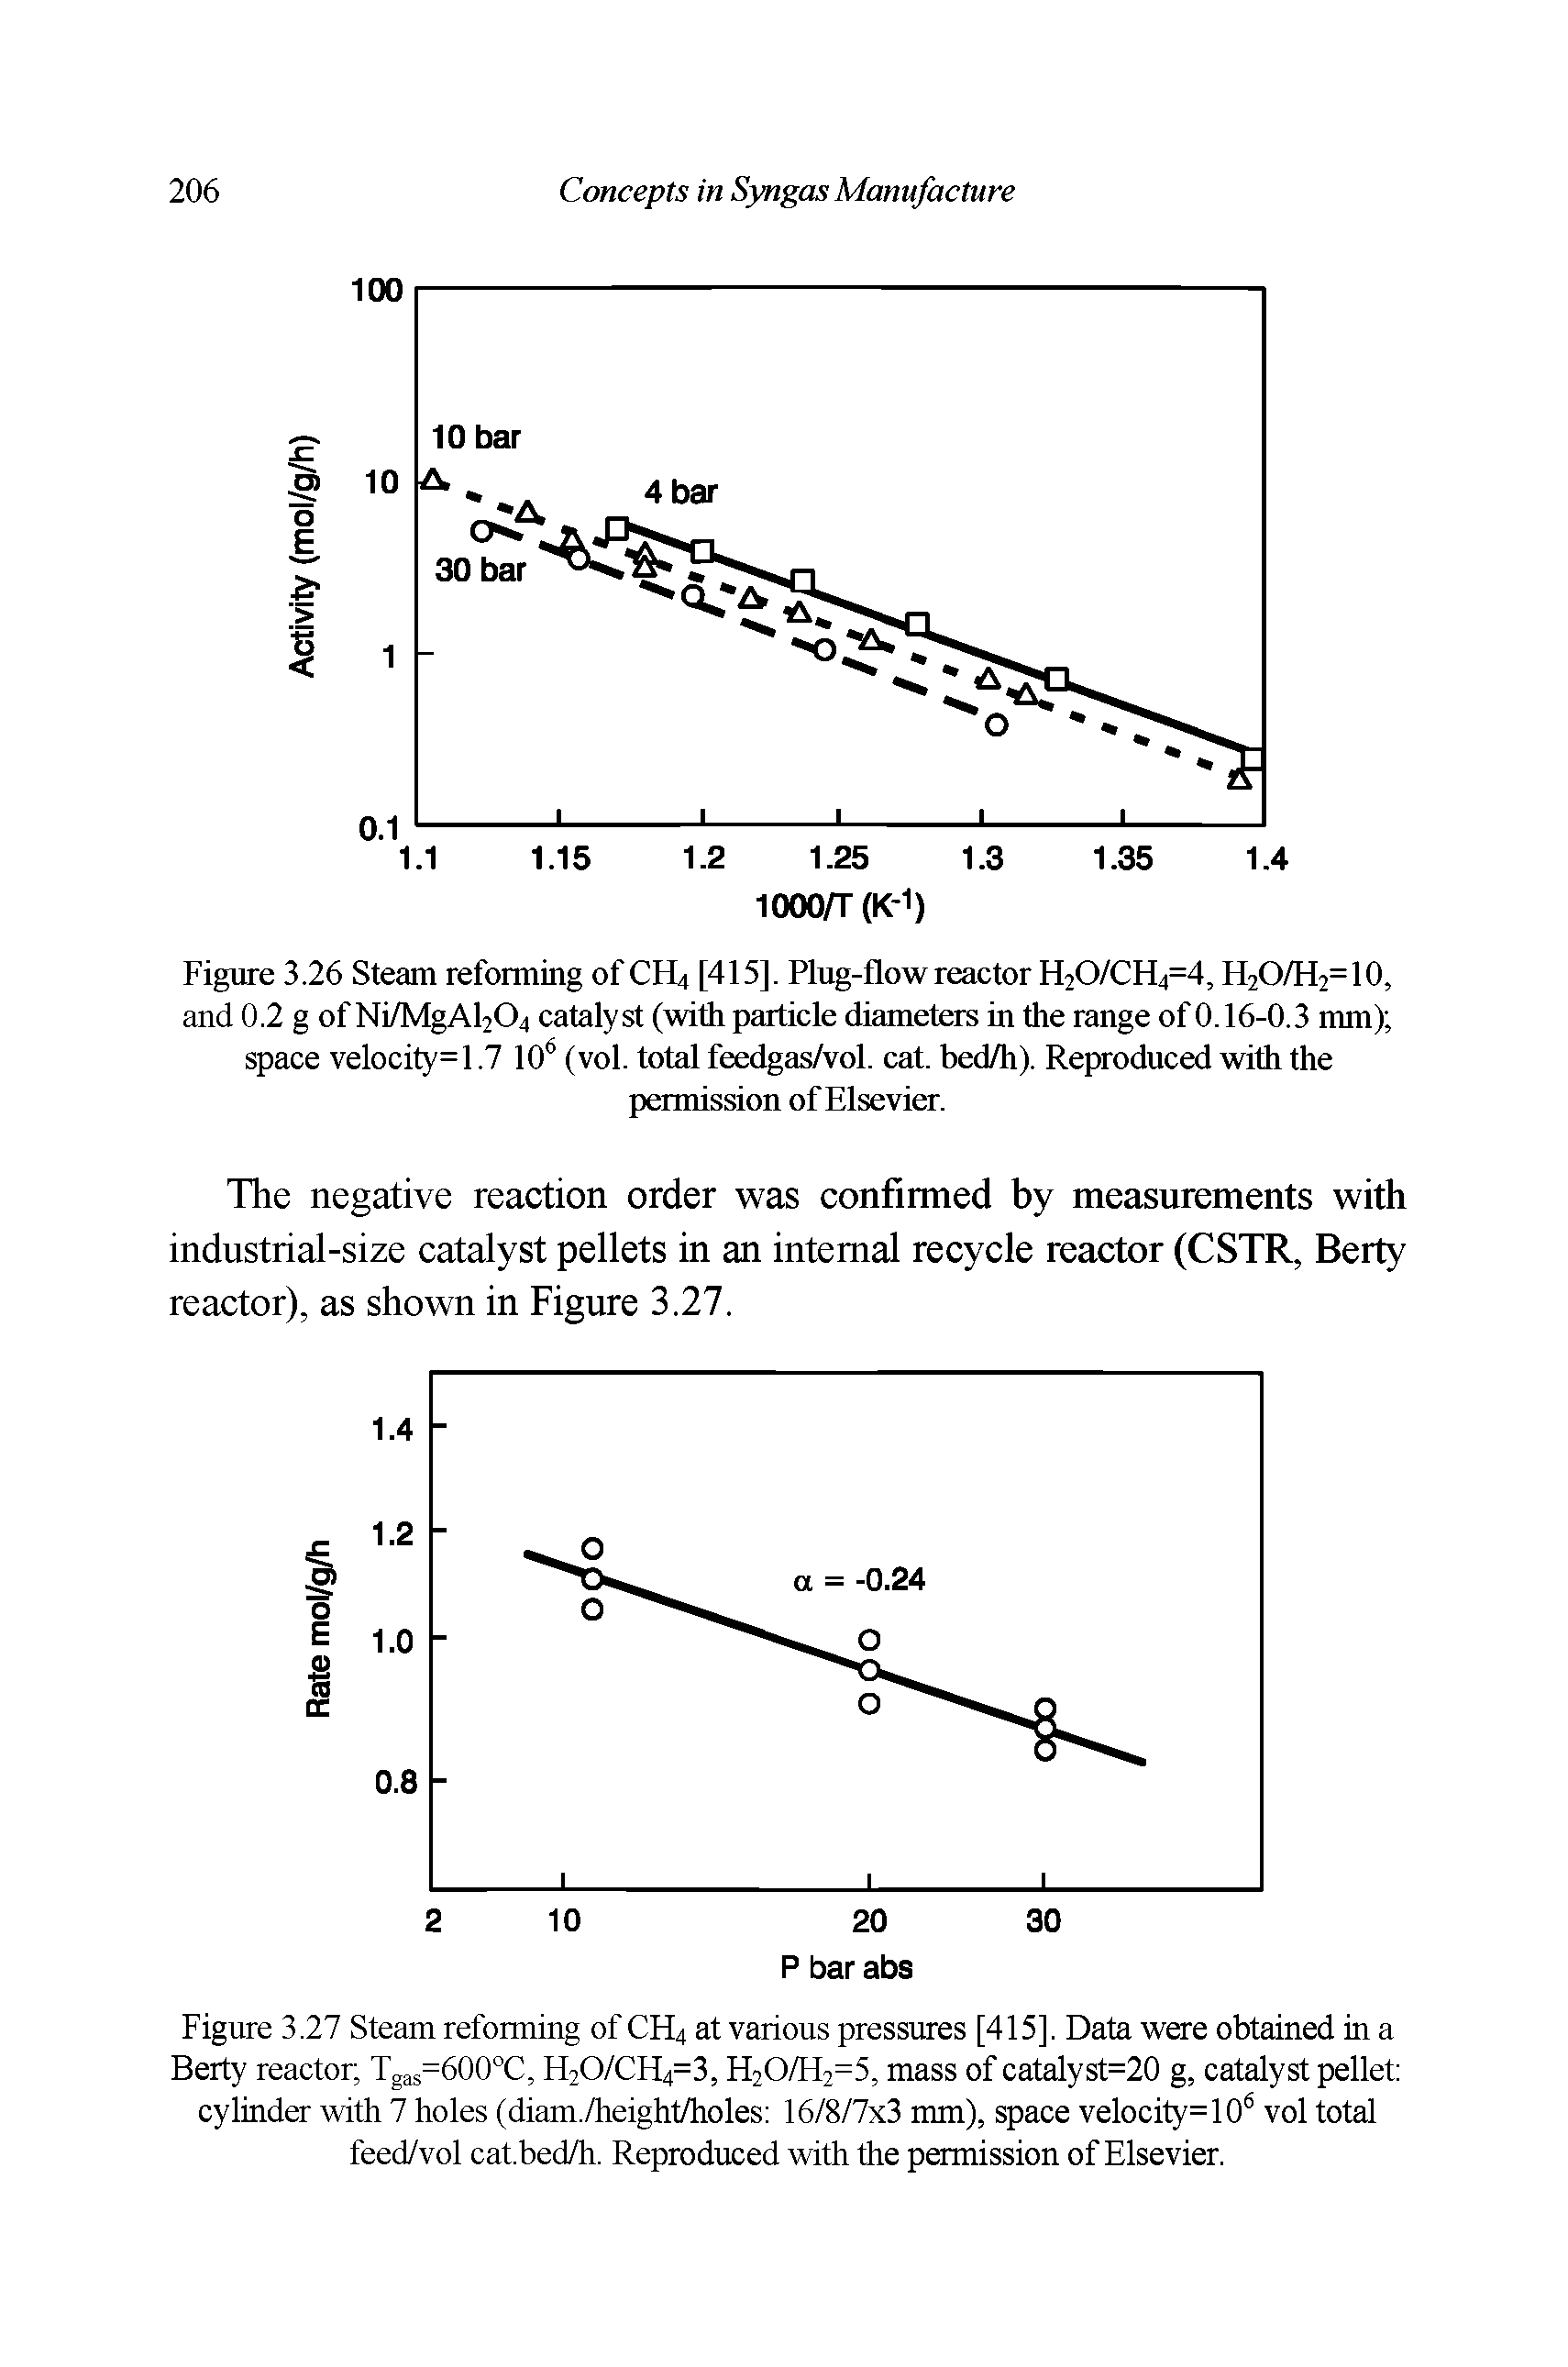 Figure 3.26 Steam reforming of CH4 [415]. Plug-flow reactor H2O/CH4M, H2O/H2=10, and 0.2 g of Ni/MgAl204 catalyst (with particle diameters in the range of 0.16-0.3 mm) space velocity=l. 7 10 (vol. total feedgas/vol. cat. bed/h). Reproduced with the permission of Elsevier.